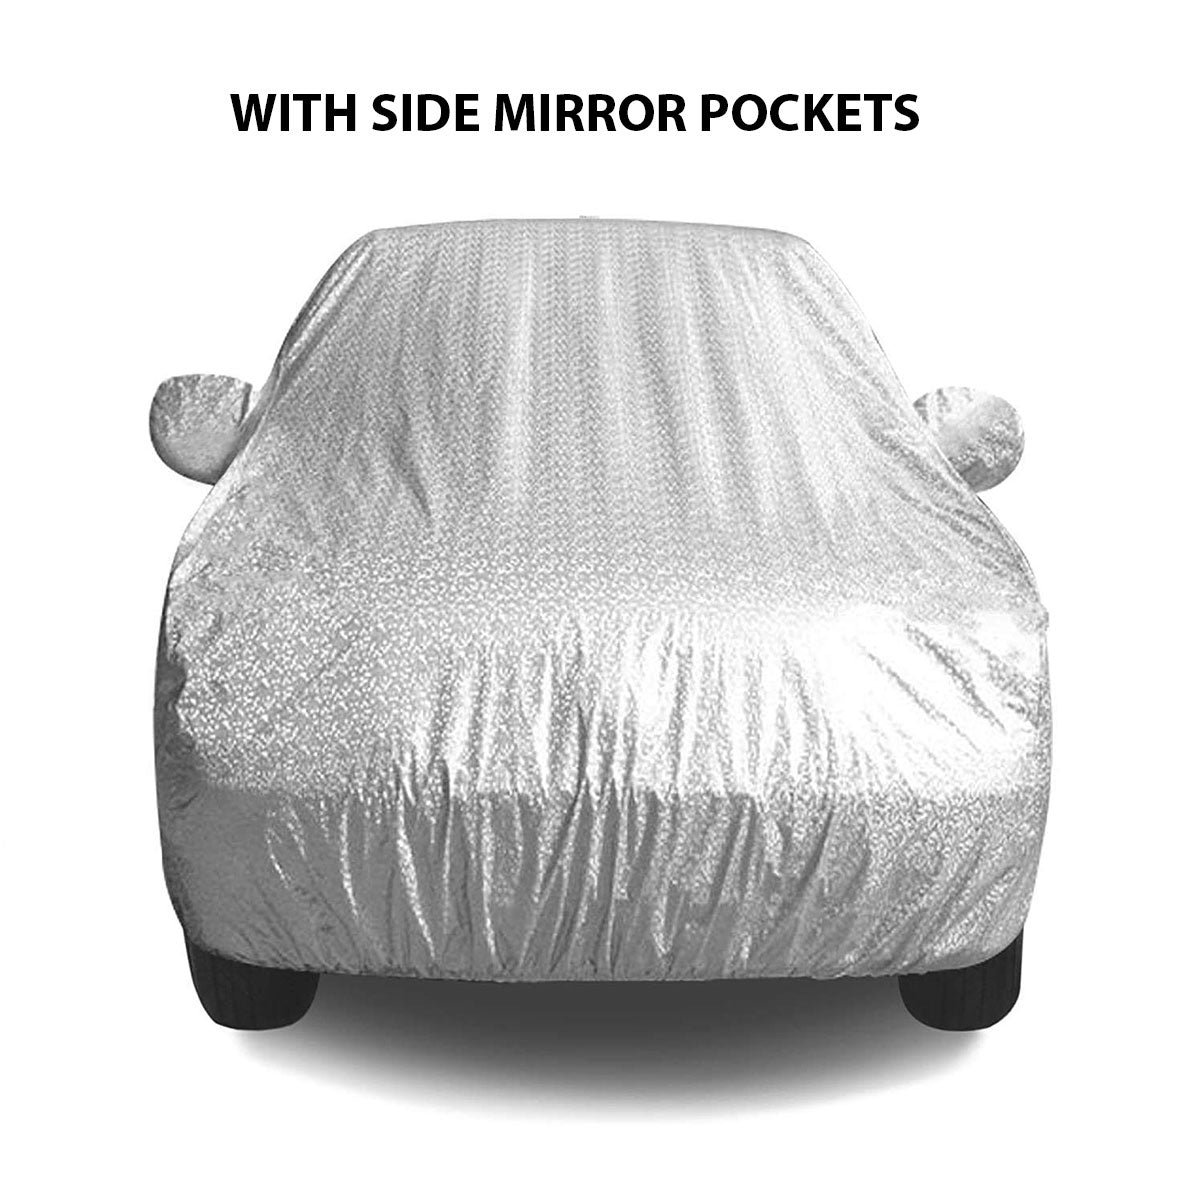 Oshotto Spyro Silver Anti Reflective, dustProof Silver and Water Proof Silver Car Body Cover with Mirror Pockets For BMW 7 Series